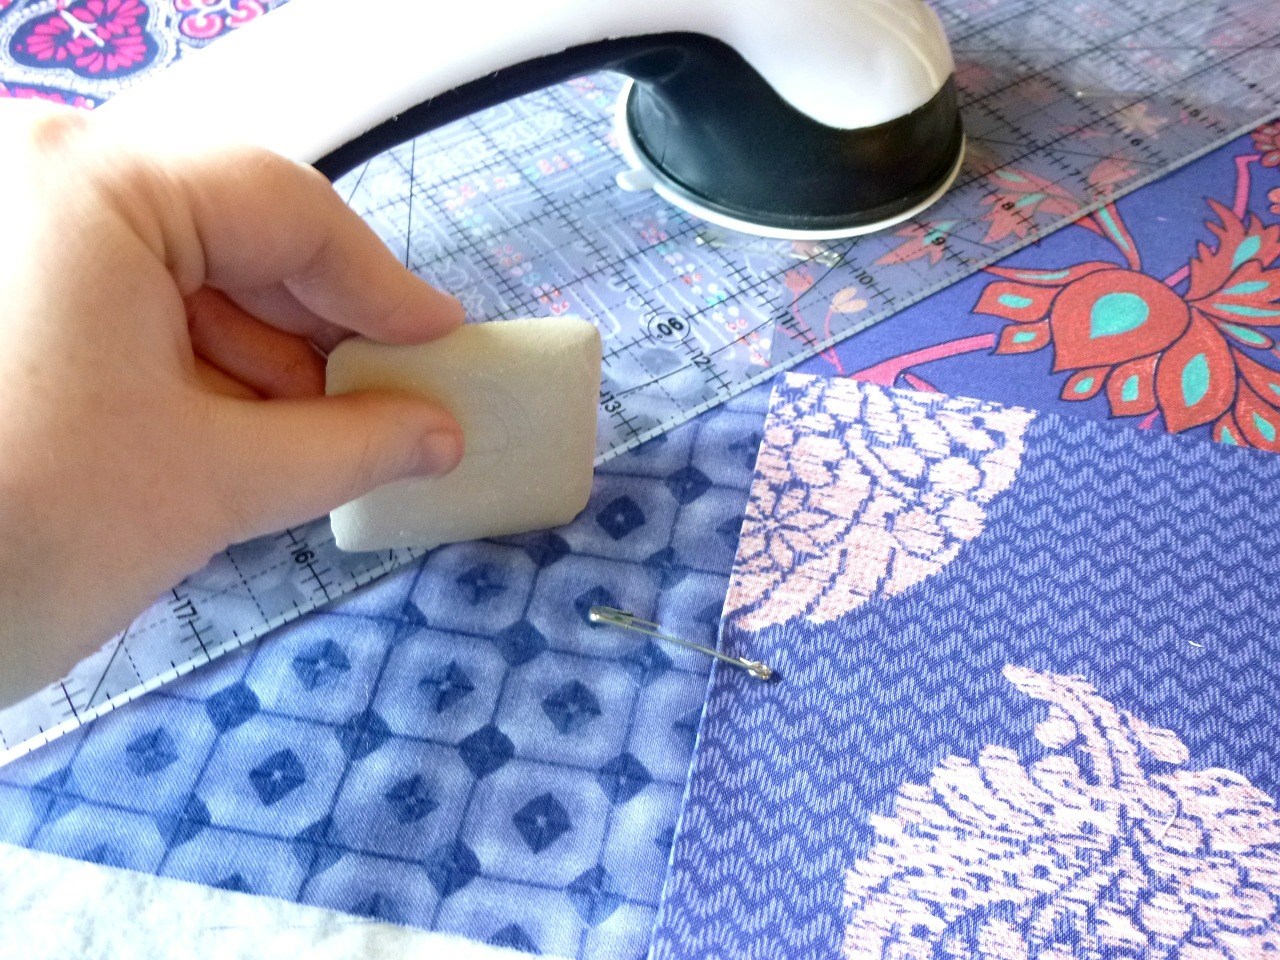 A hand is shown working on a quilt.